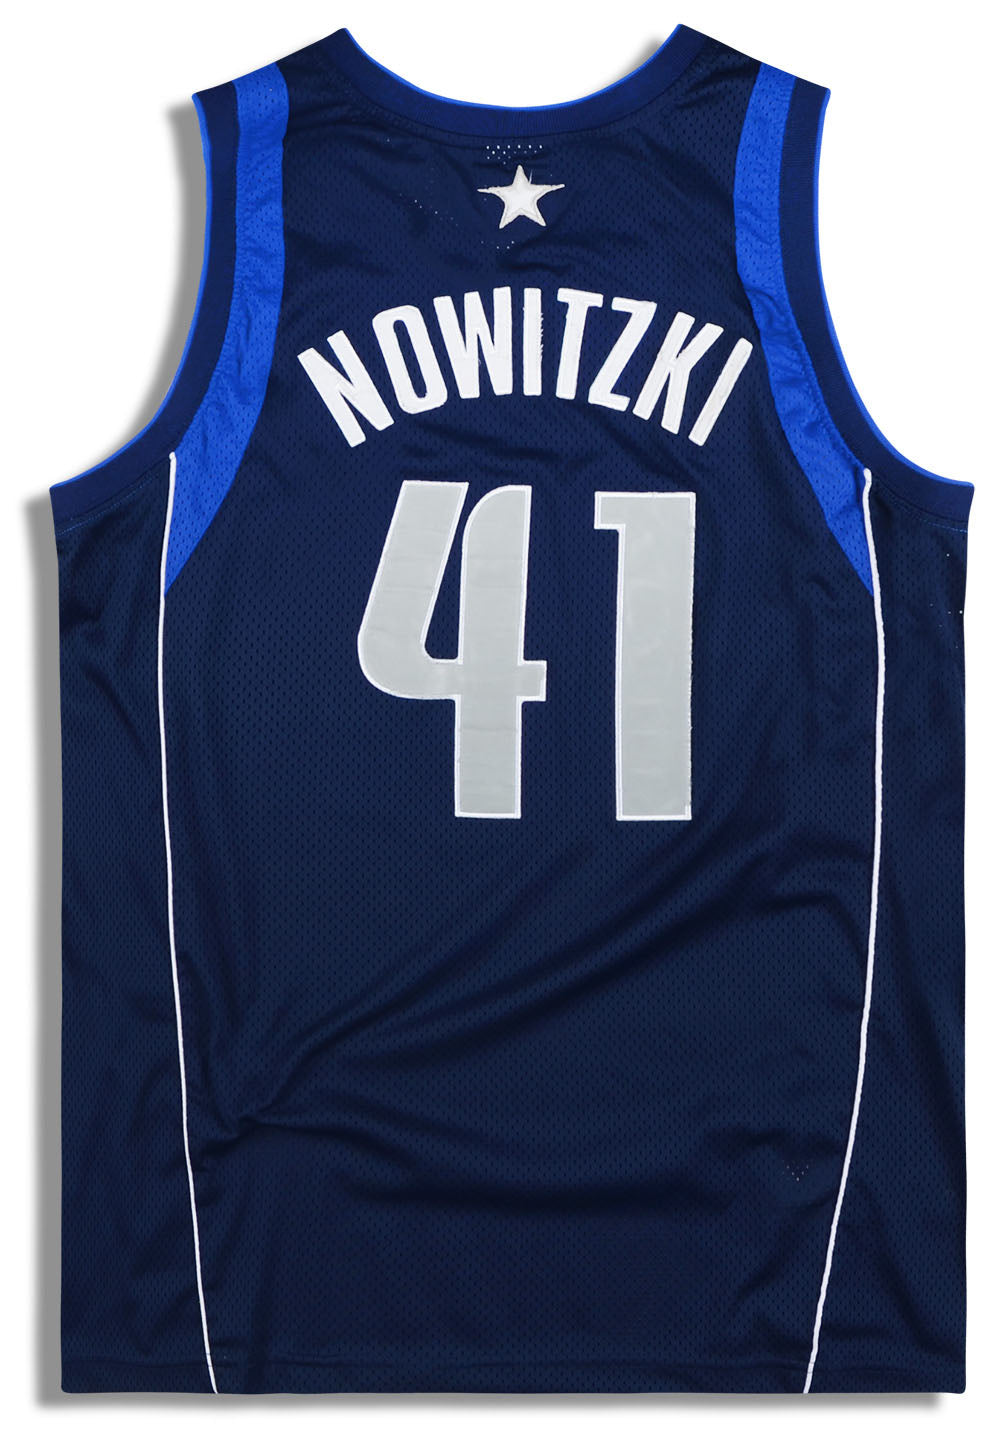 Took new photos of my Mavs jersey collection. Always looking to make it  grow. On the quest for my holy grail of an Authentic 1998-1999 Home Rookie  Dirk Nowitzki jersey : r/Mavericks